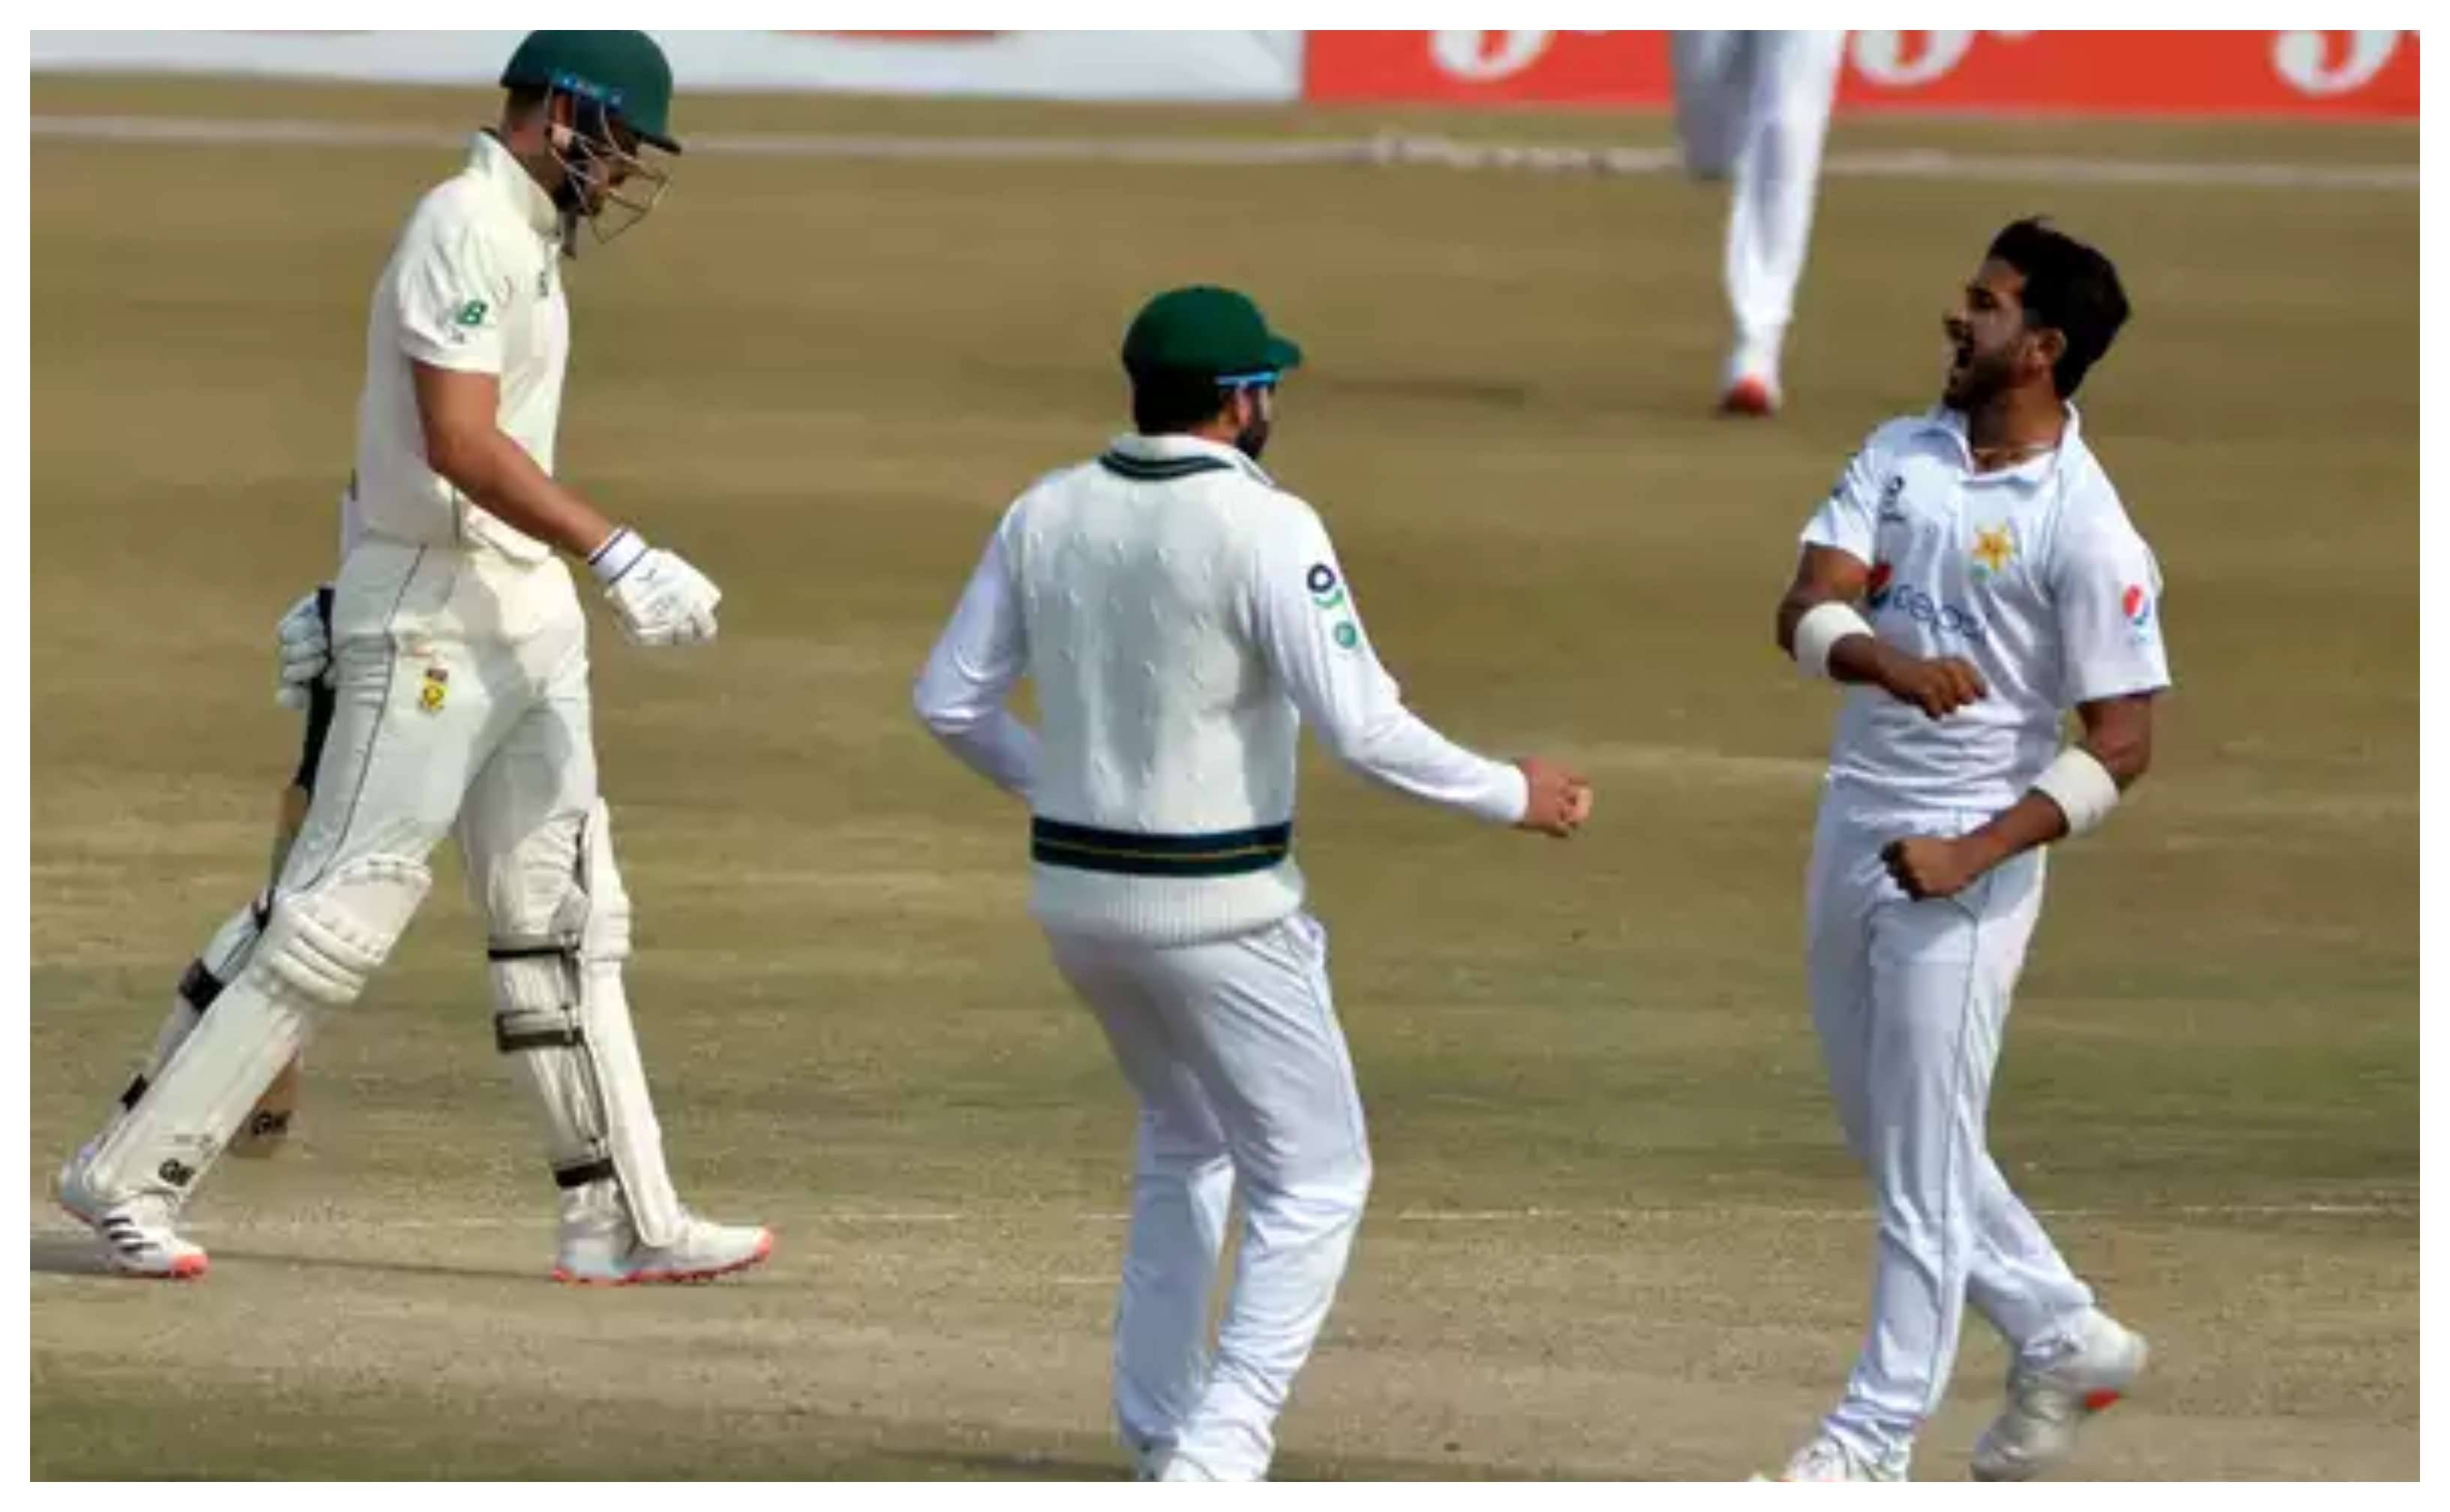 Hassan claimed his maiden 10-wicket haul in Rawalpindi Test | PCB